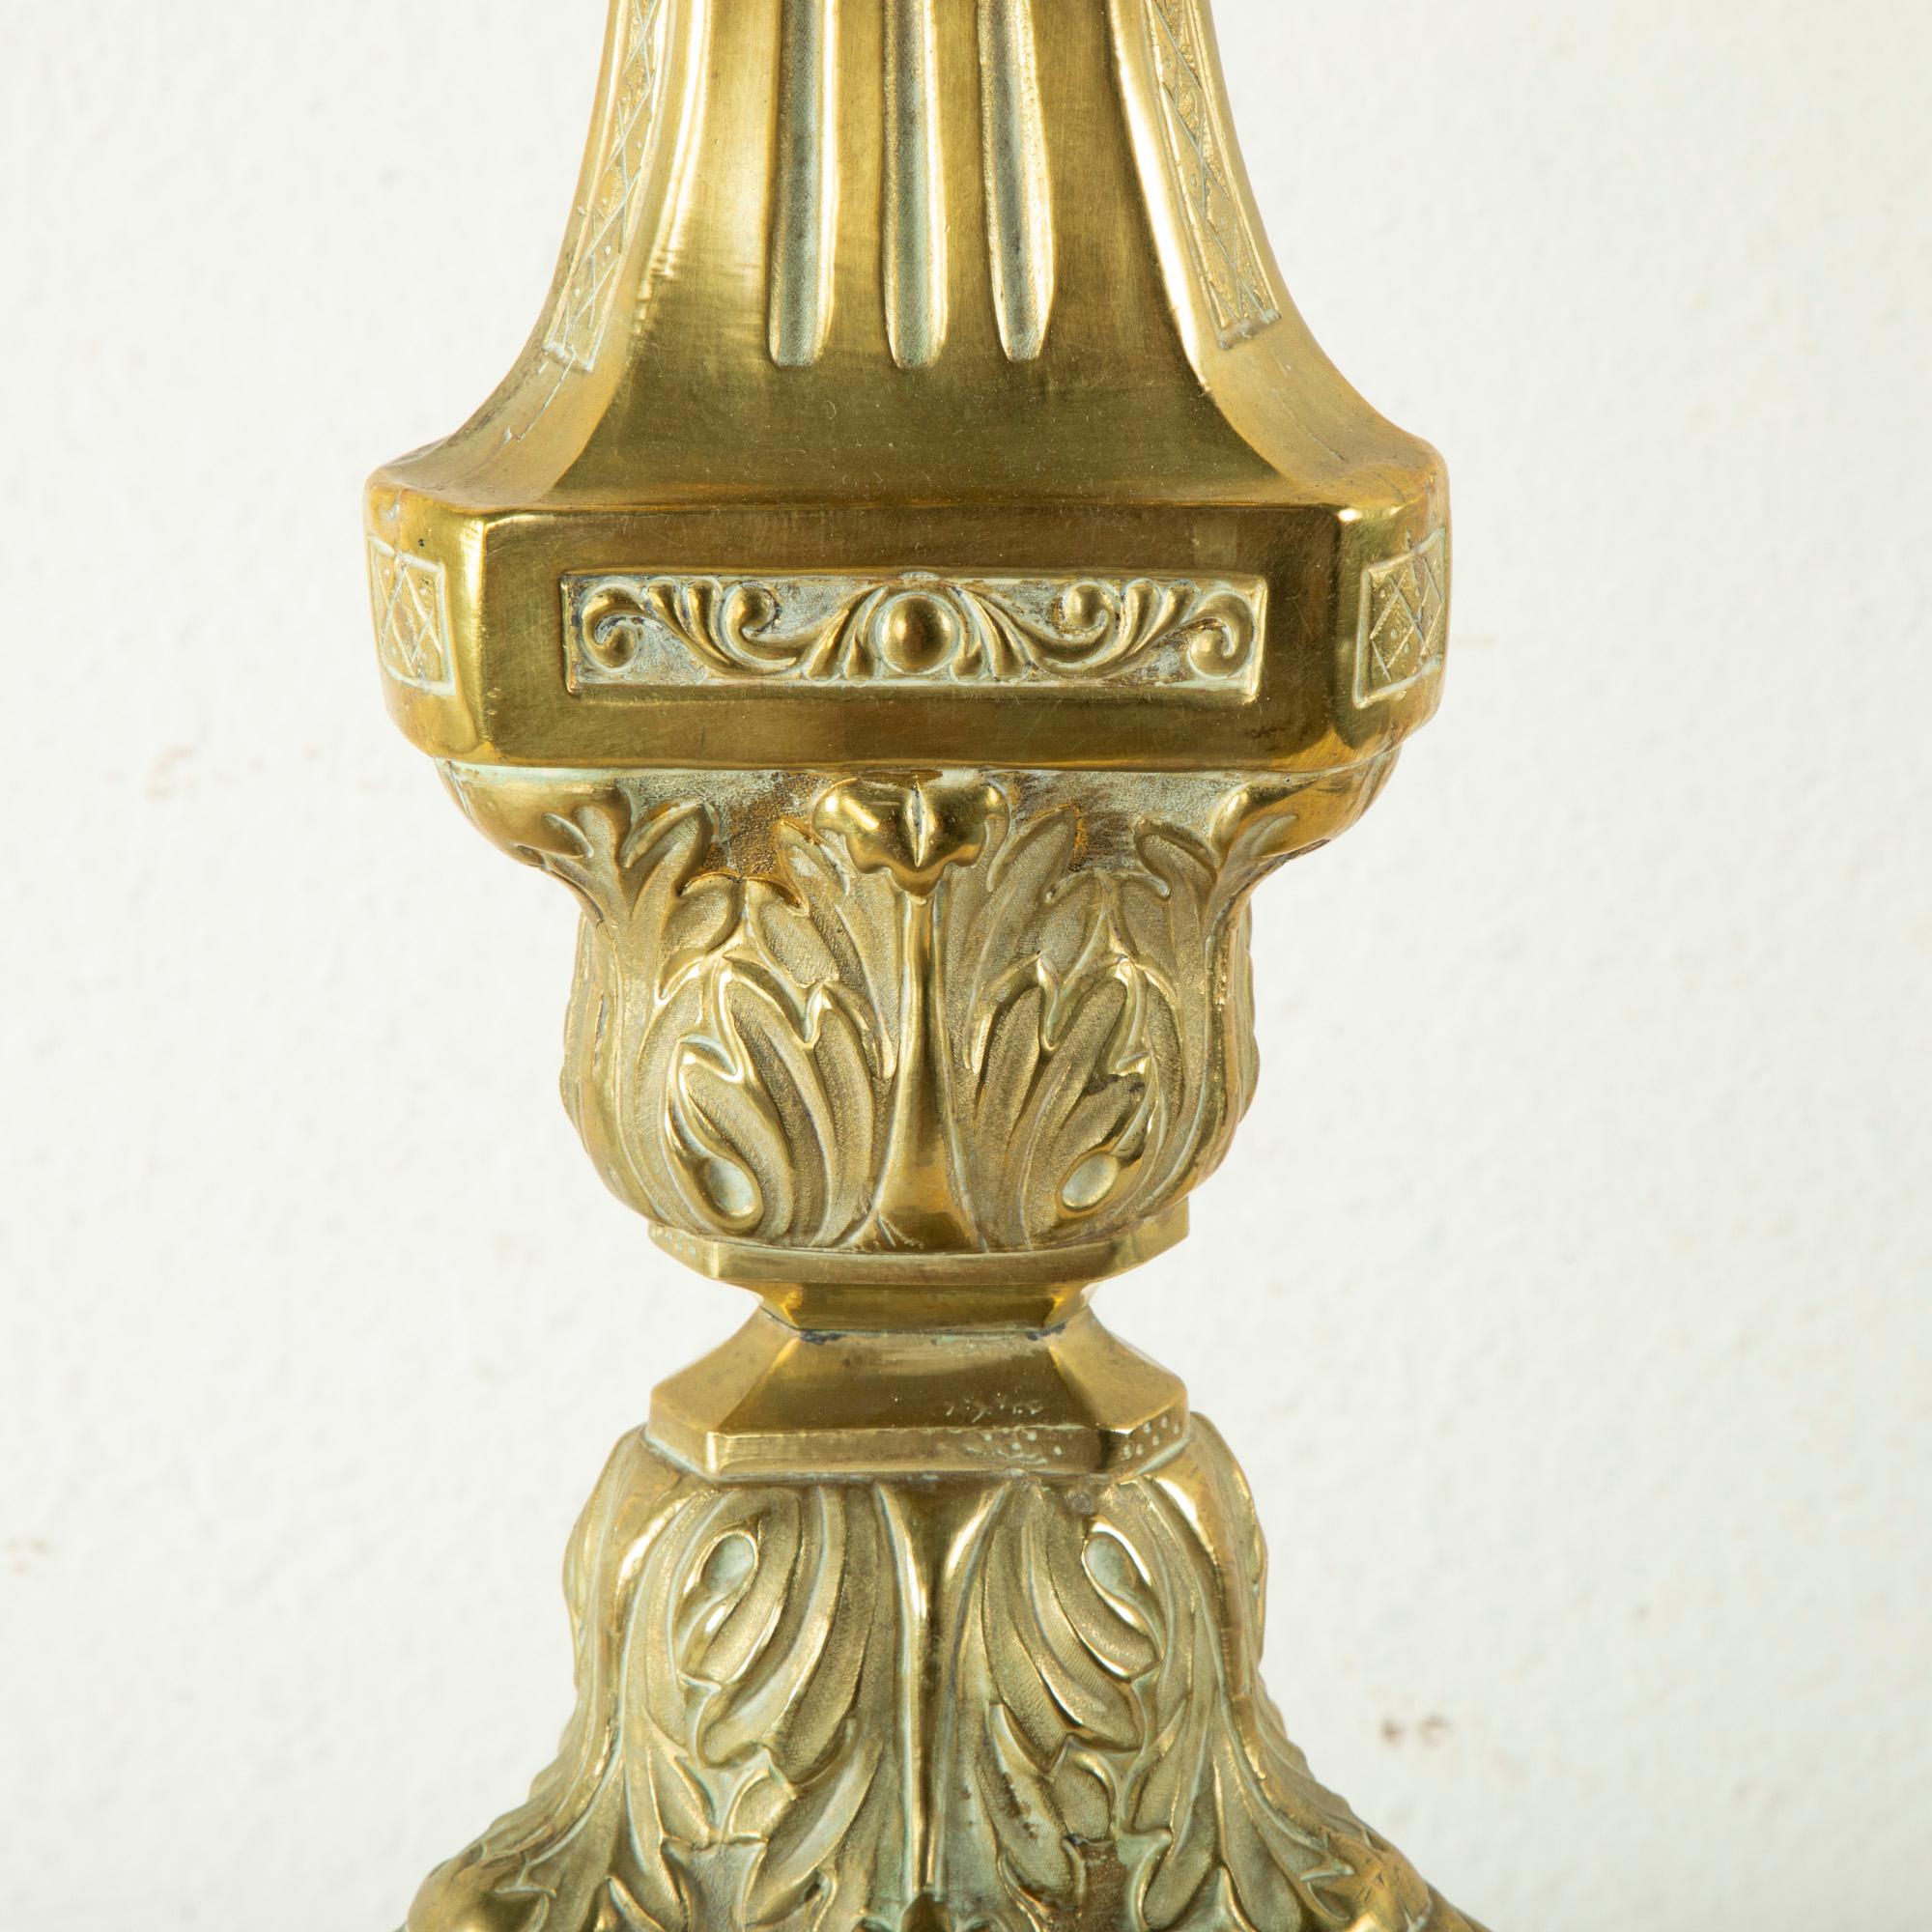 Tall Late 19th Century Brass Repousse Church Pricket, Candlestick For Sale 2